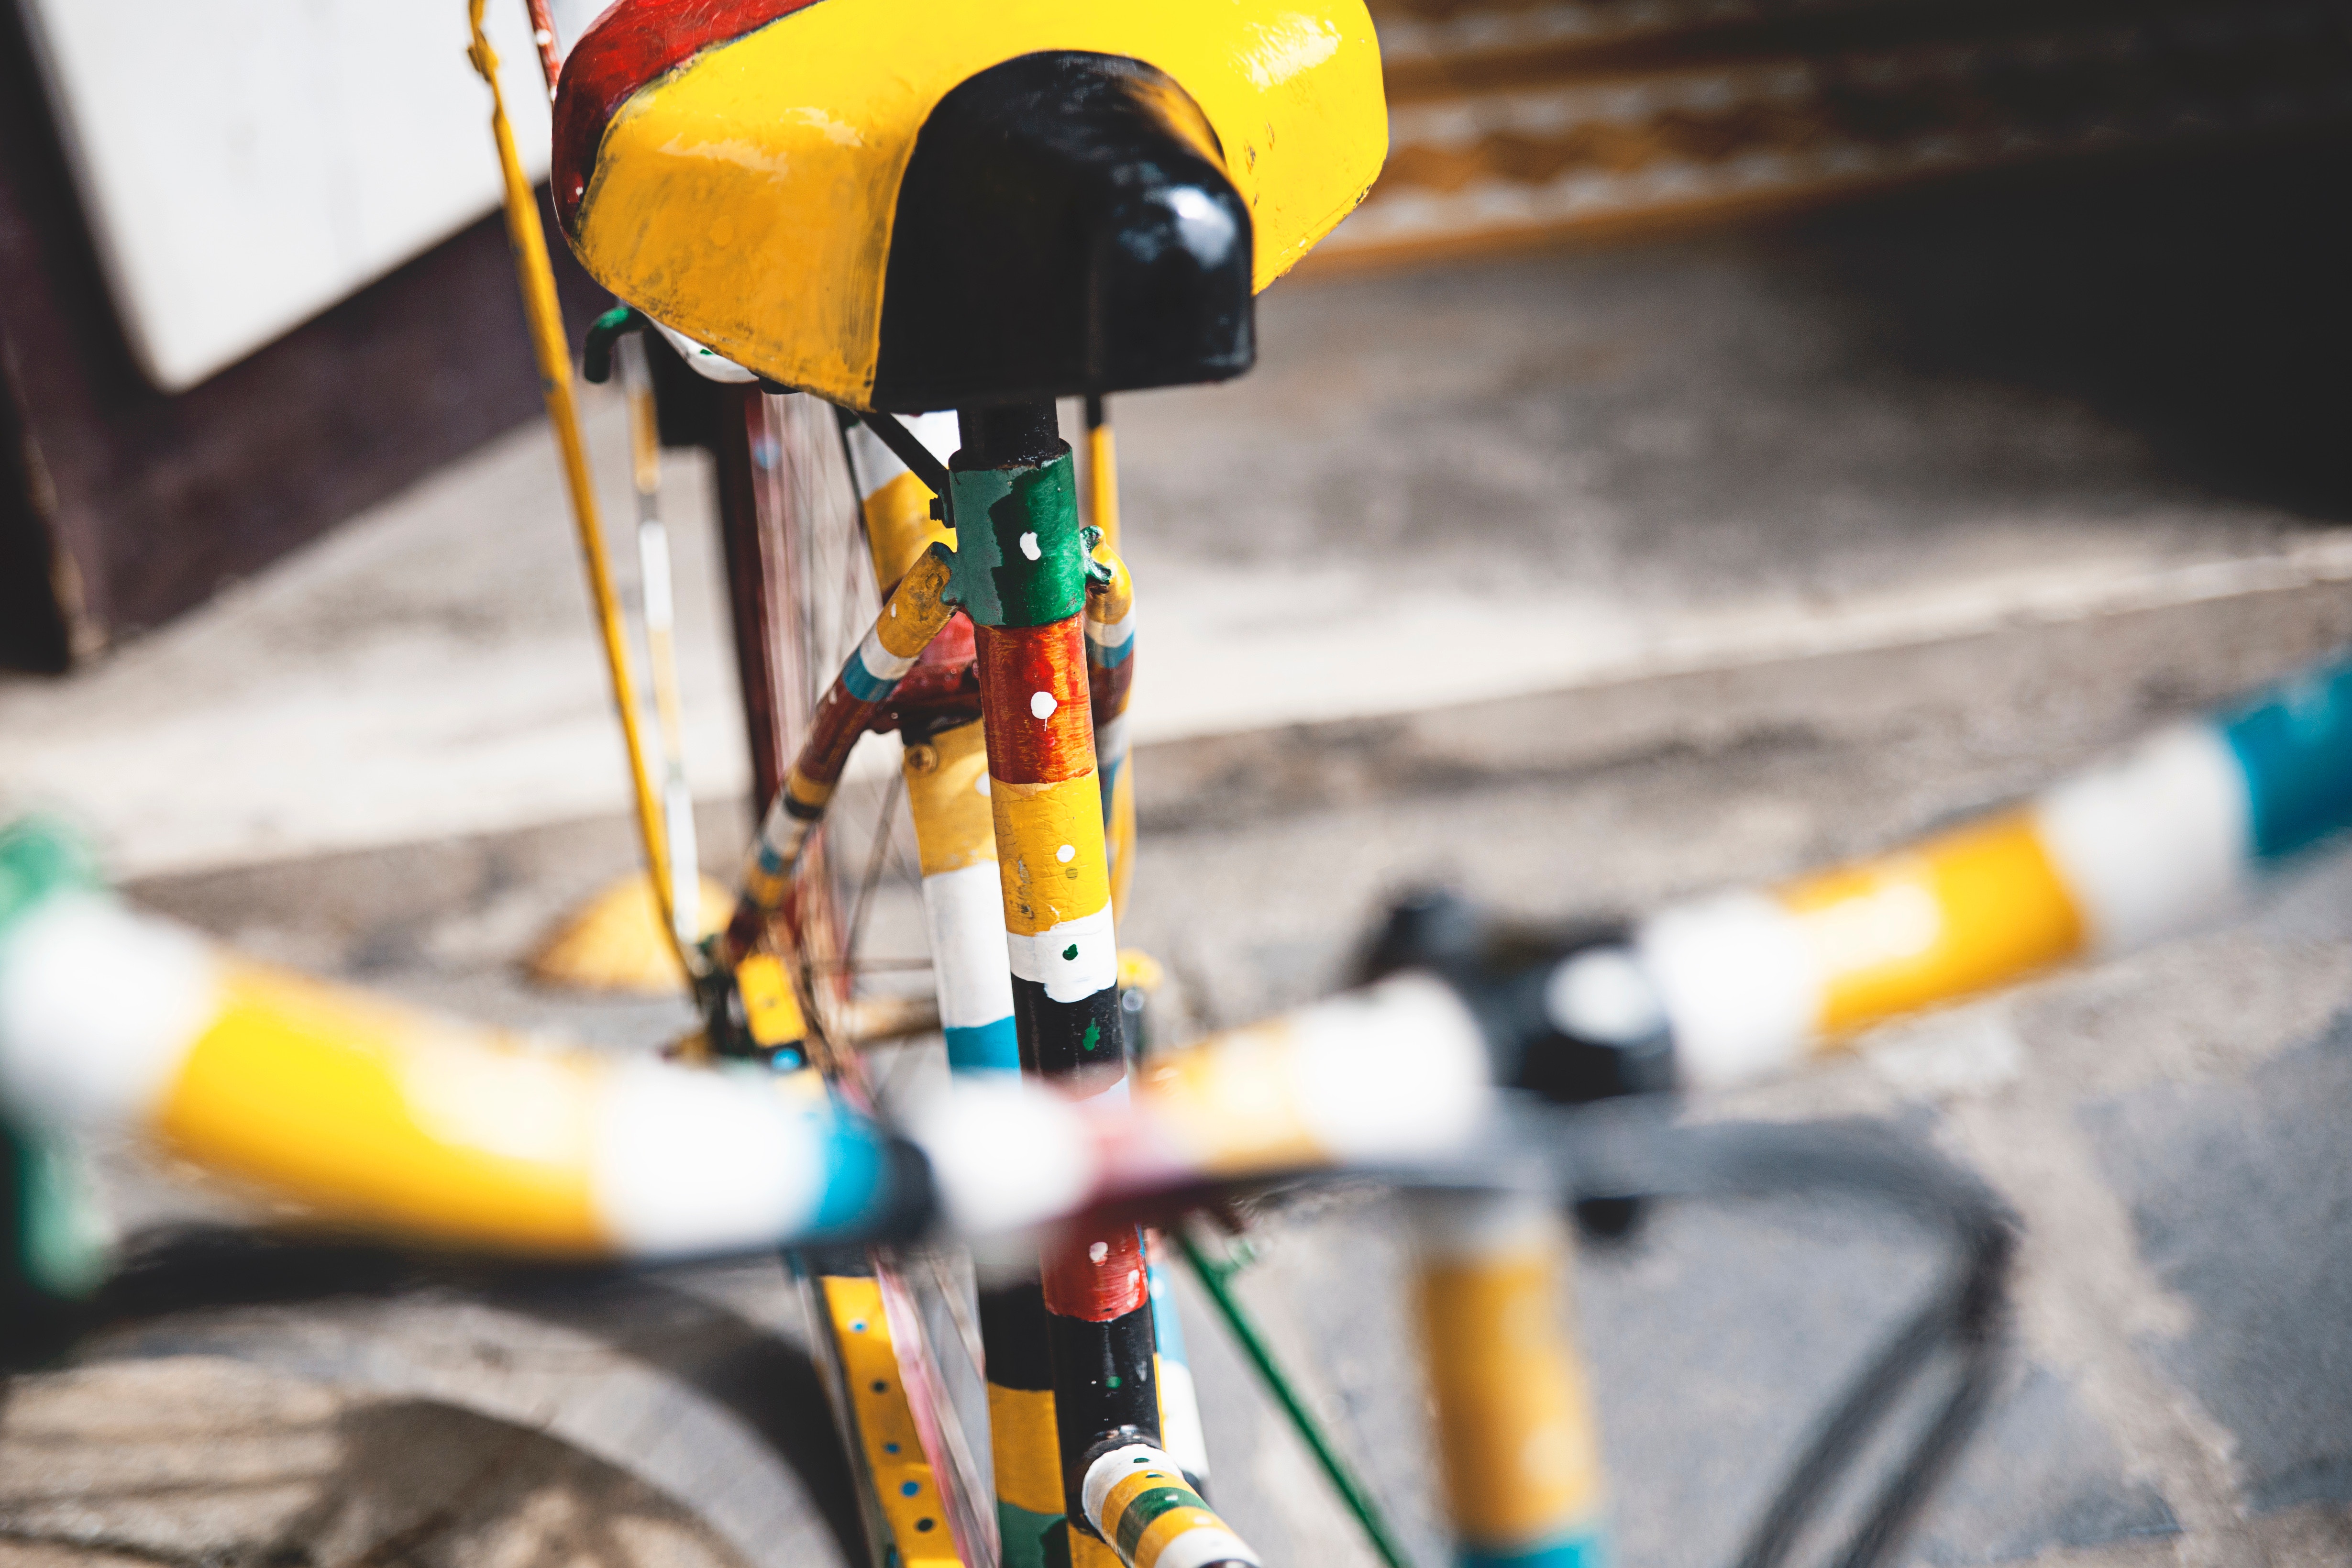 Brightly painted old bicycle can add a touch of color and fun to your winter landscape. Photo by Peter Hershey.